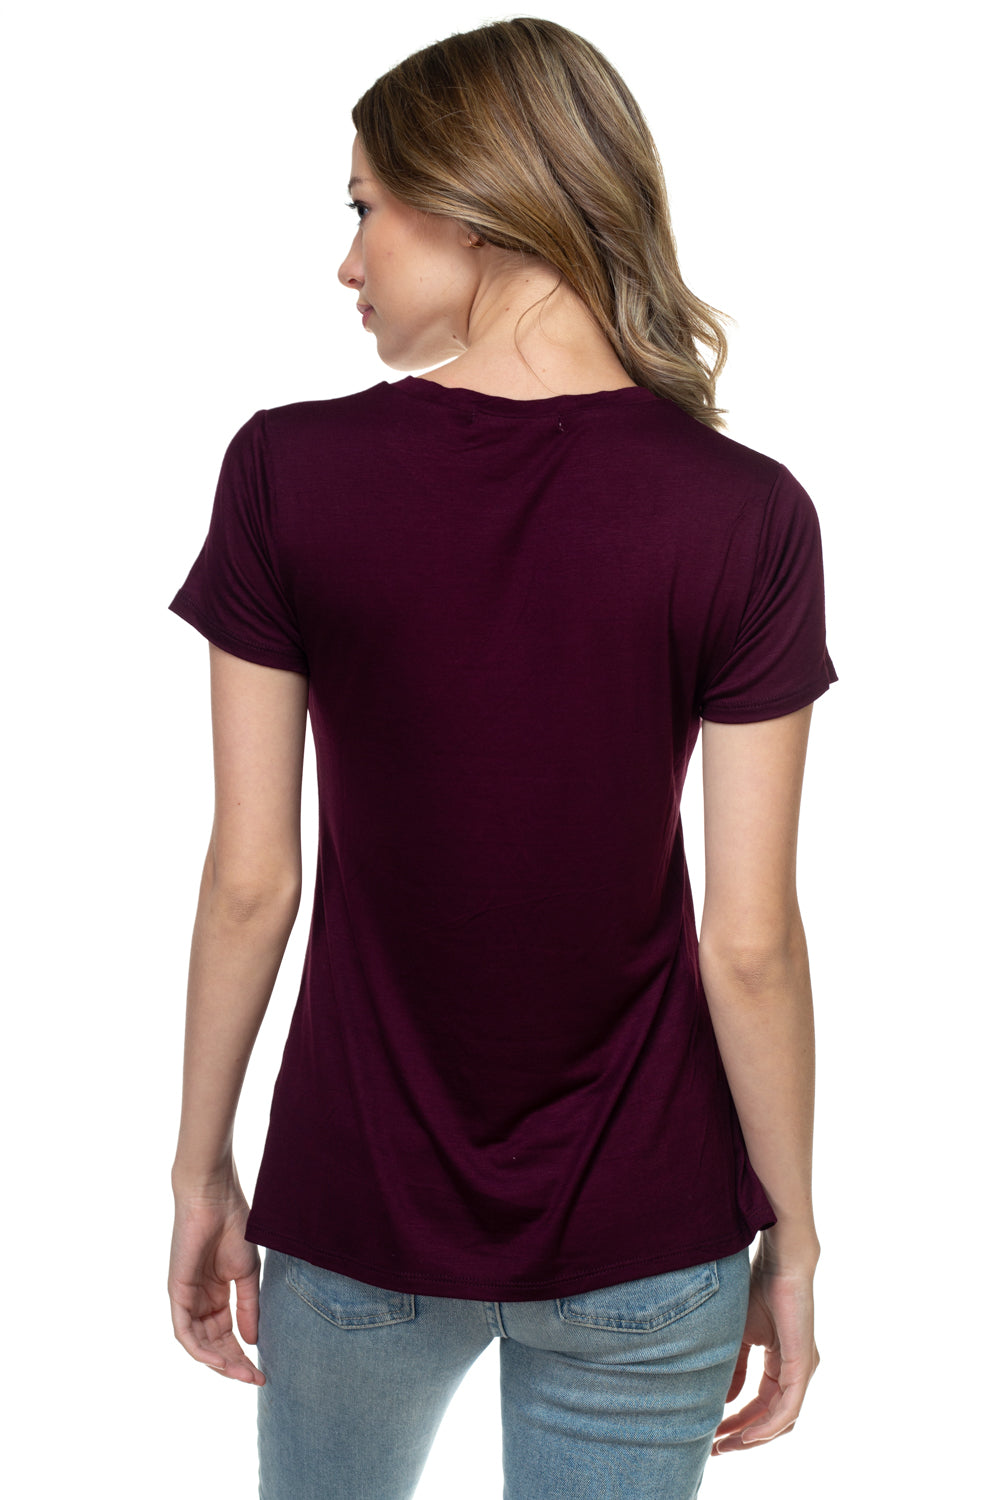 Round Neck Jersey Tee - LANY